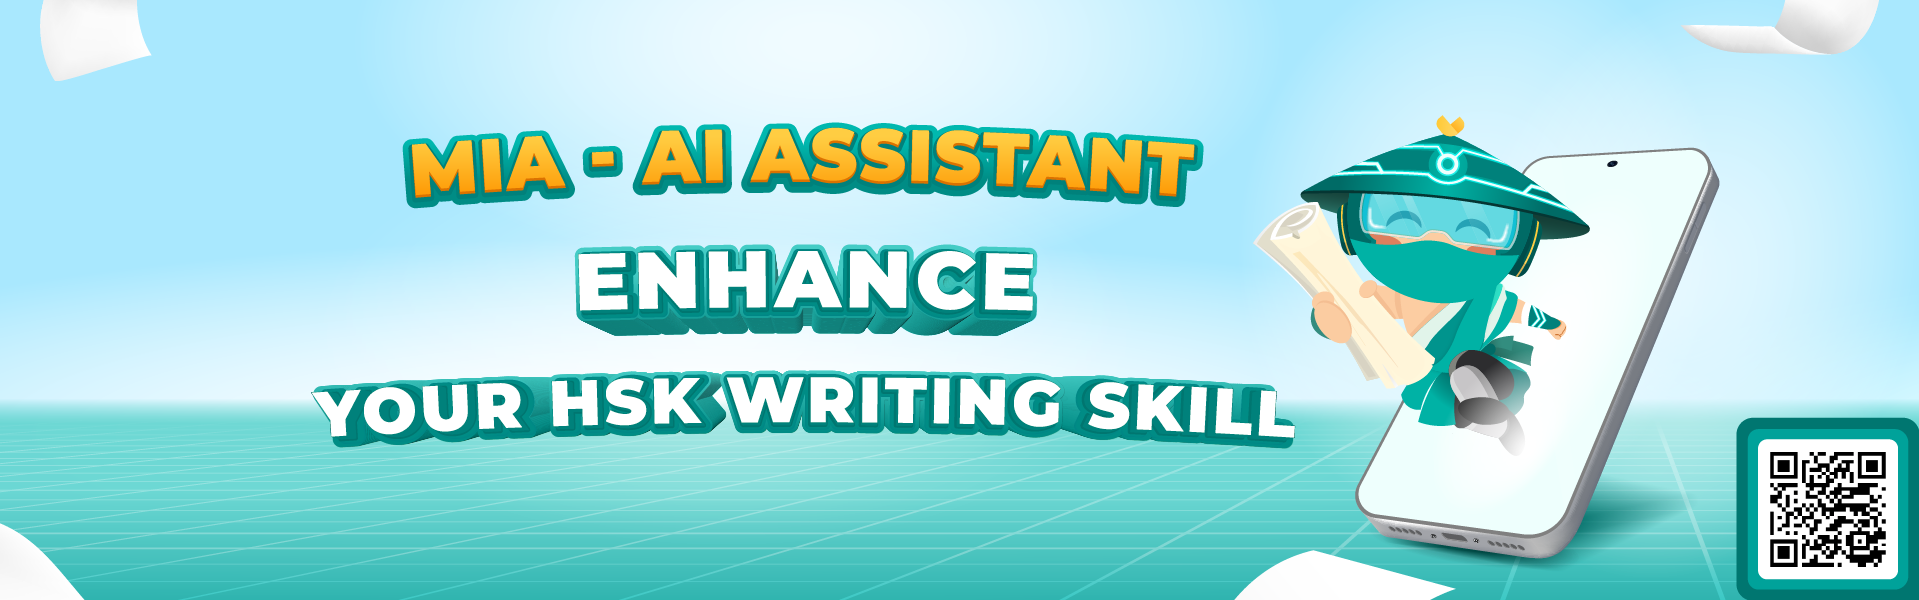 MIA - AI assistant enhance your HSK writing skill